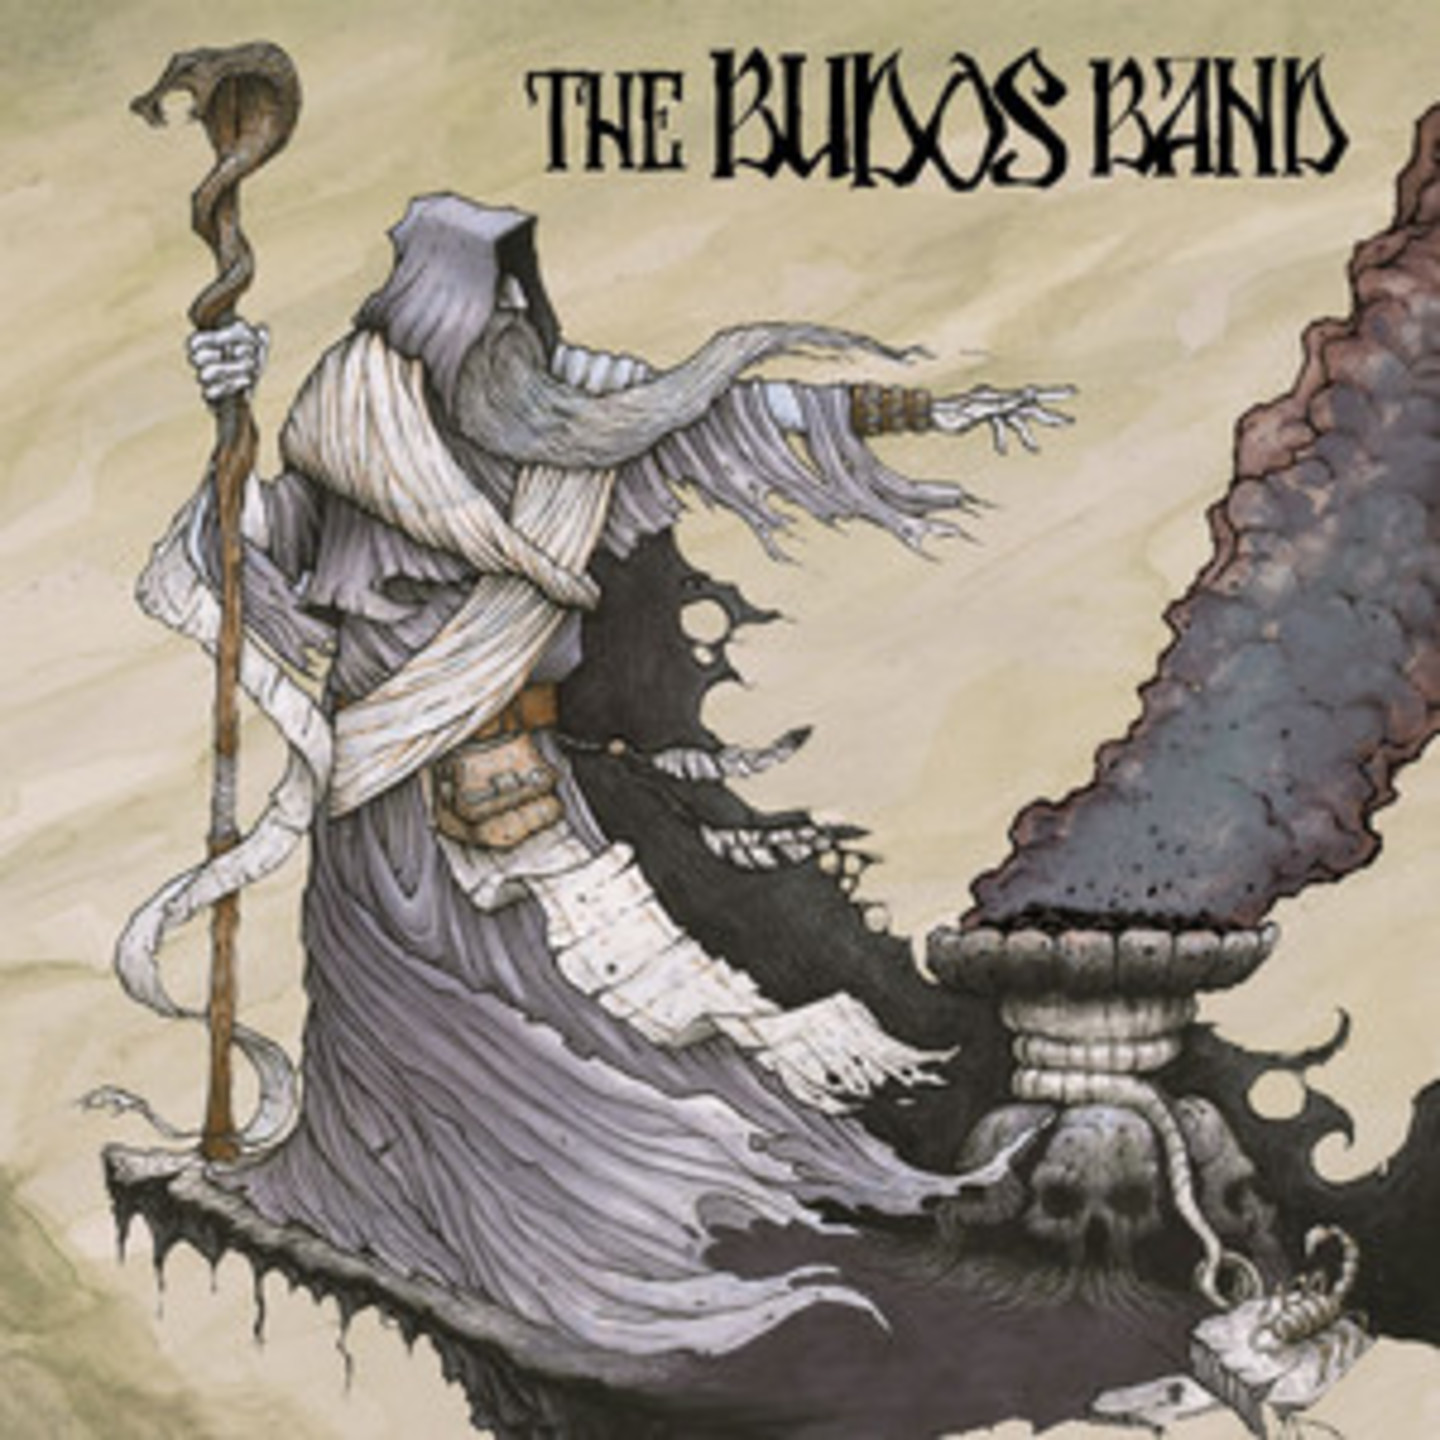 BUDOS BAND, THE - Burnt Offering LP